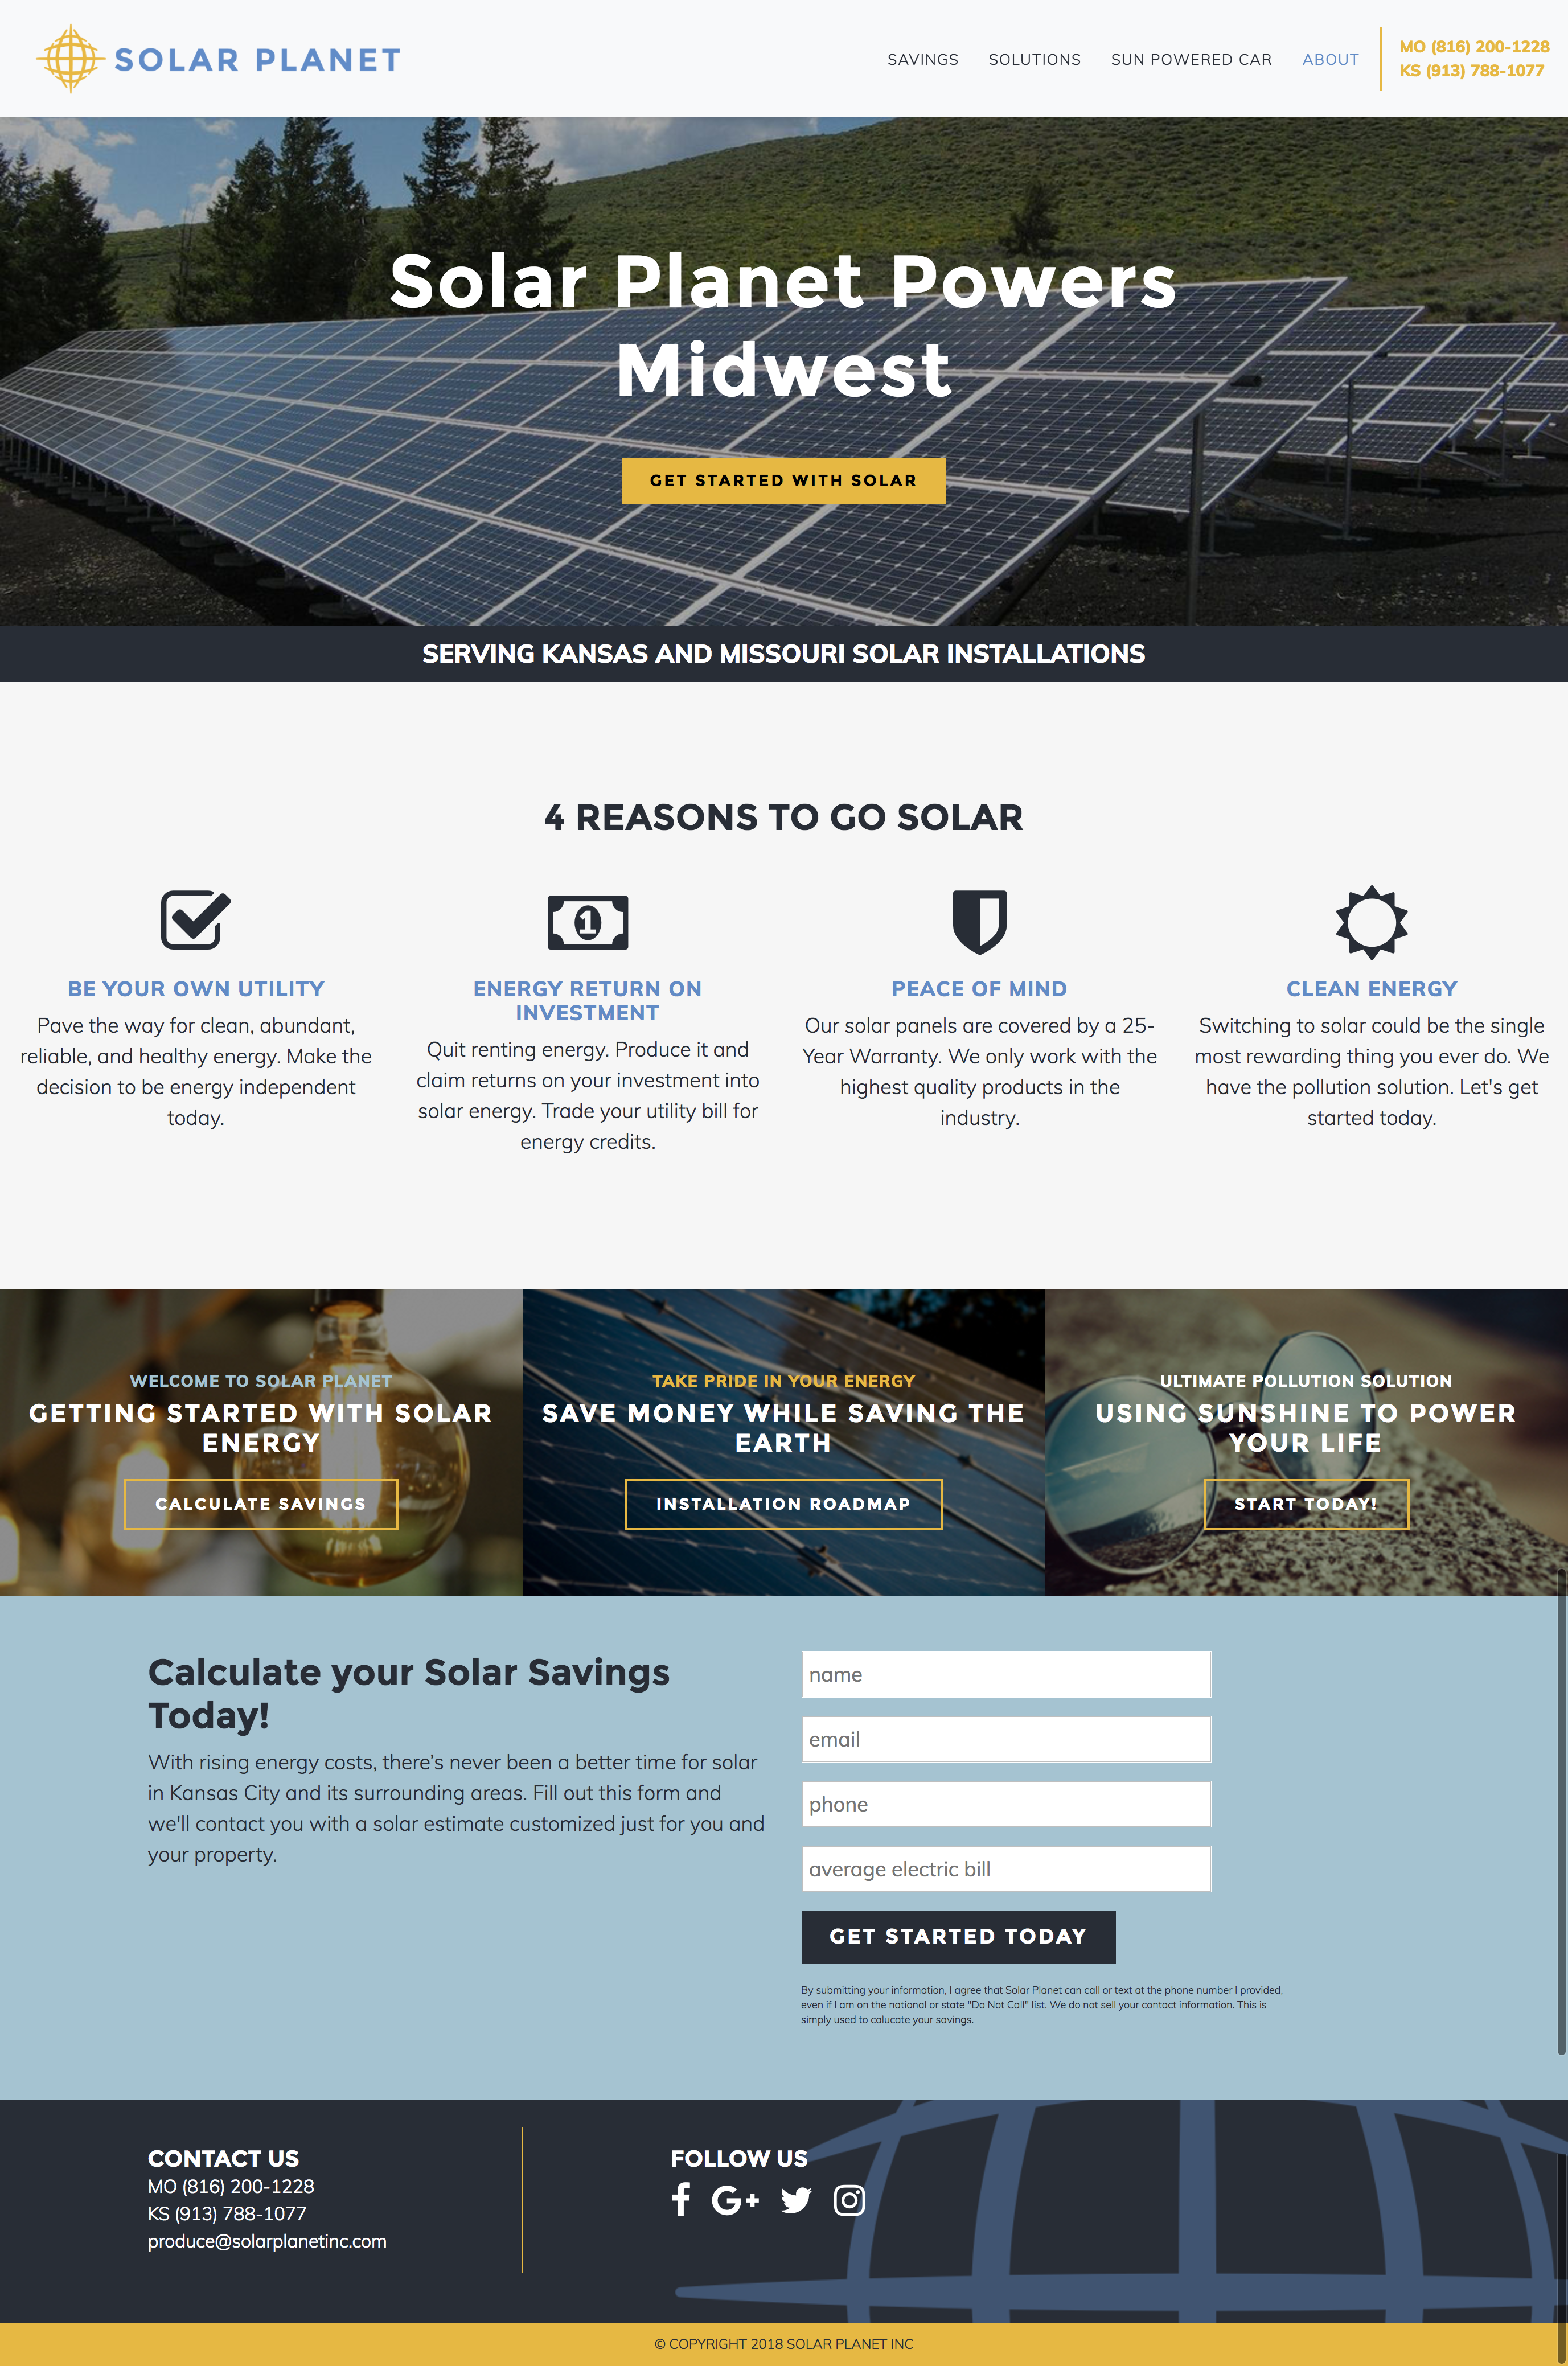 Solar Planet website home page